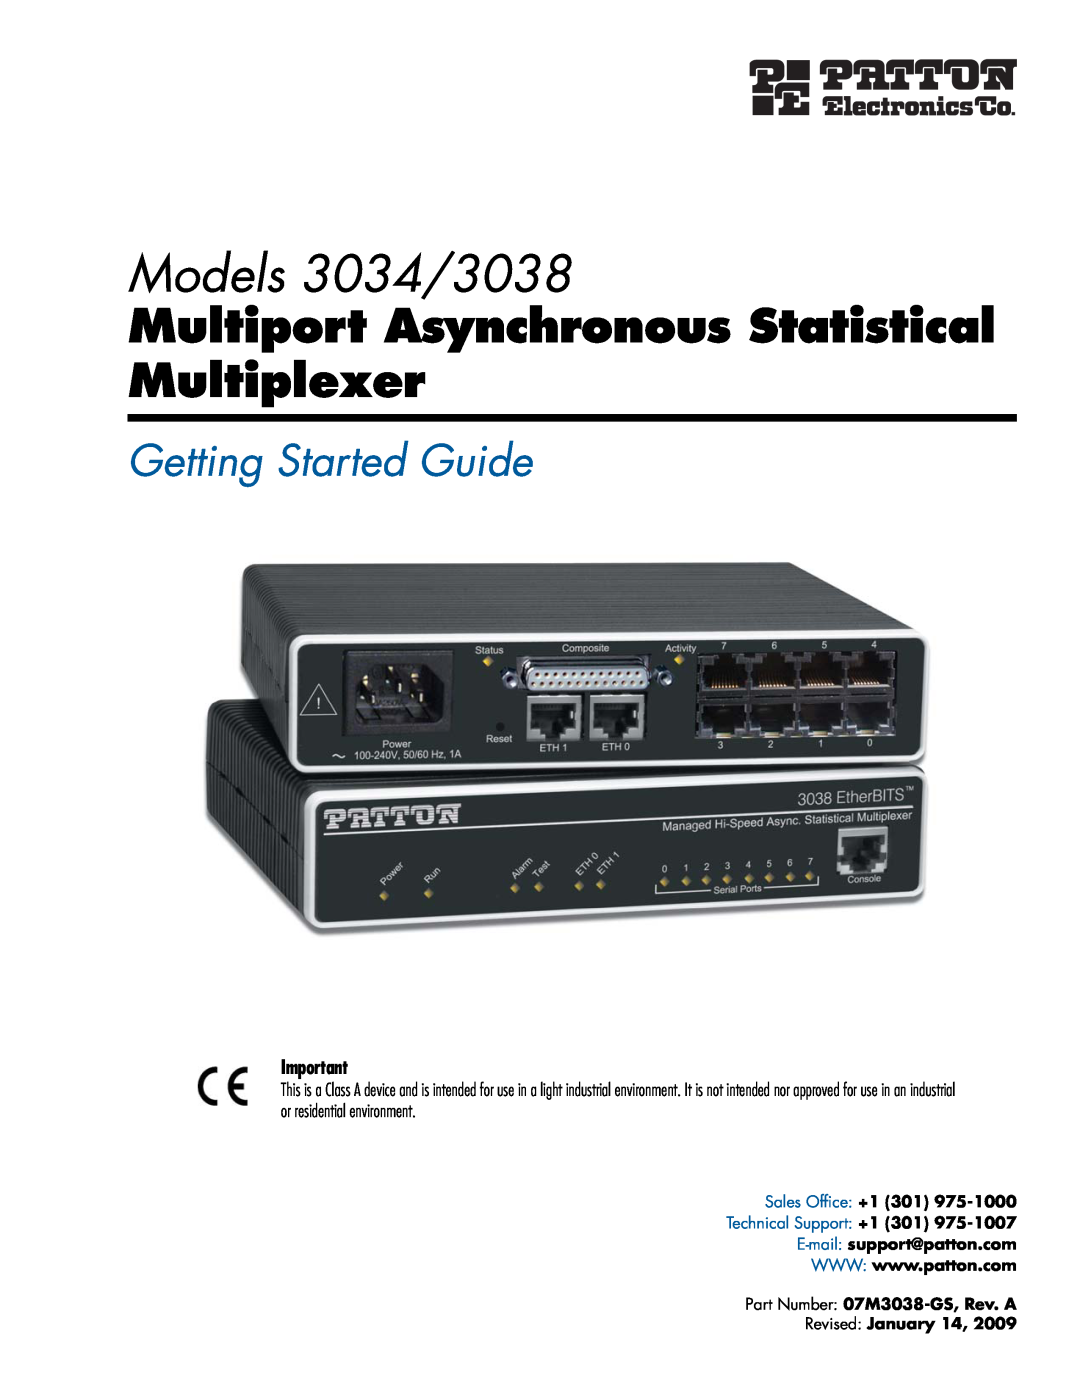 Patton electronic manual Models 3034/3038, Multiport Asynchronous Statistical Multiplexer, Getting Started Guide 